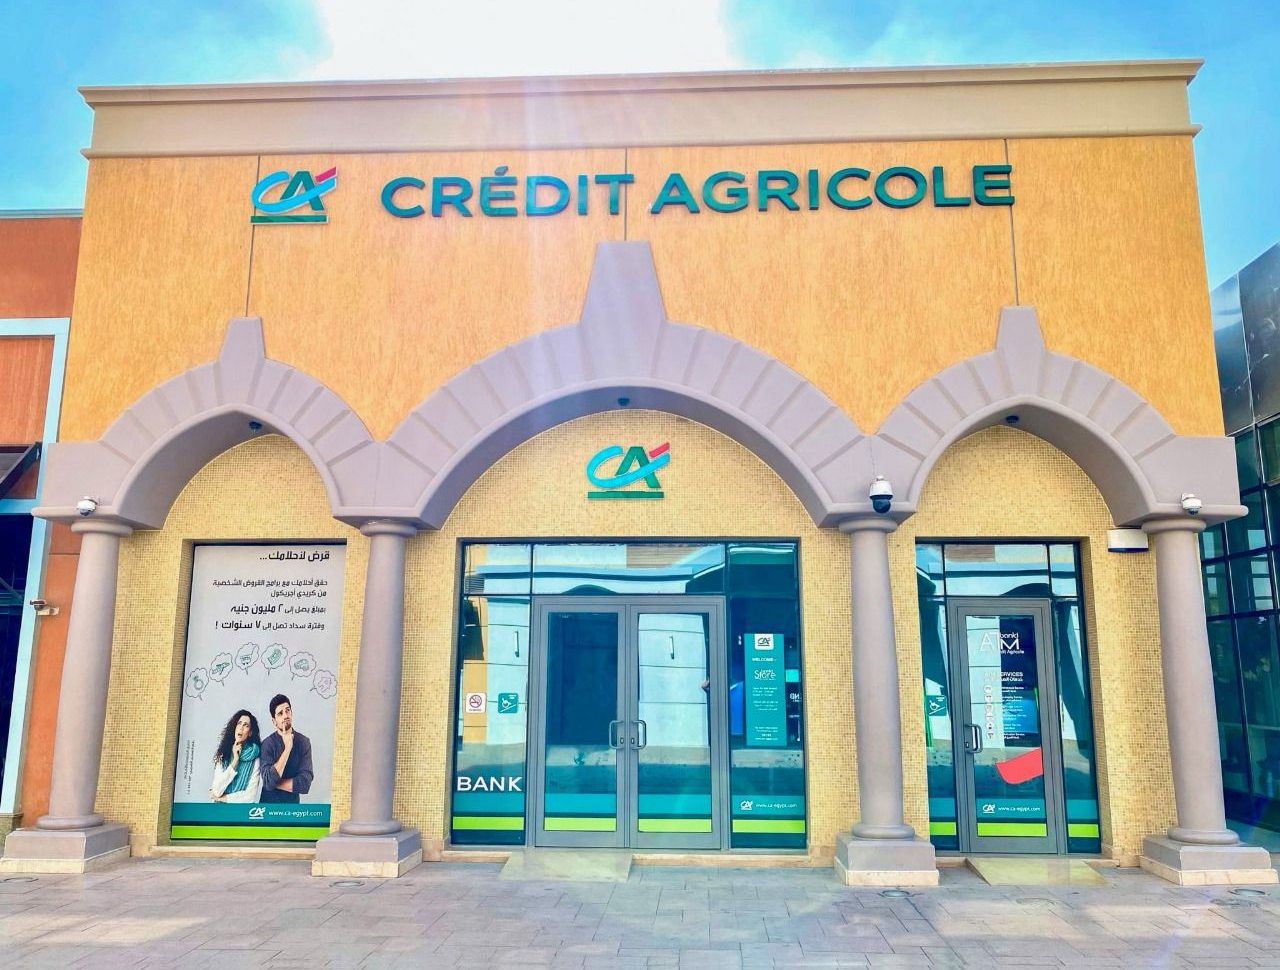 Credit Agricole 1st bank in Egypt to get US green building LEED certificate